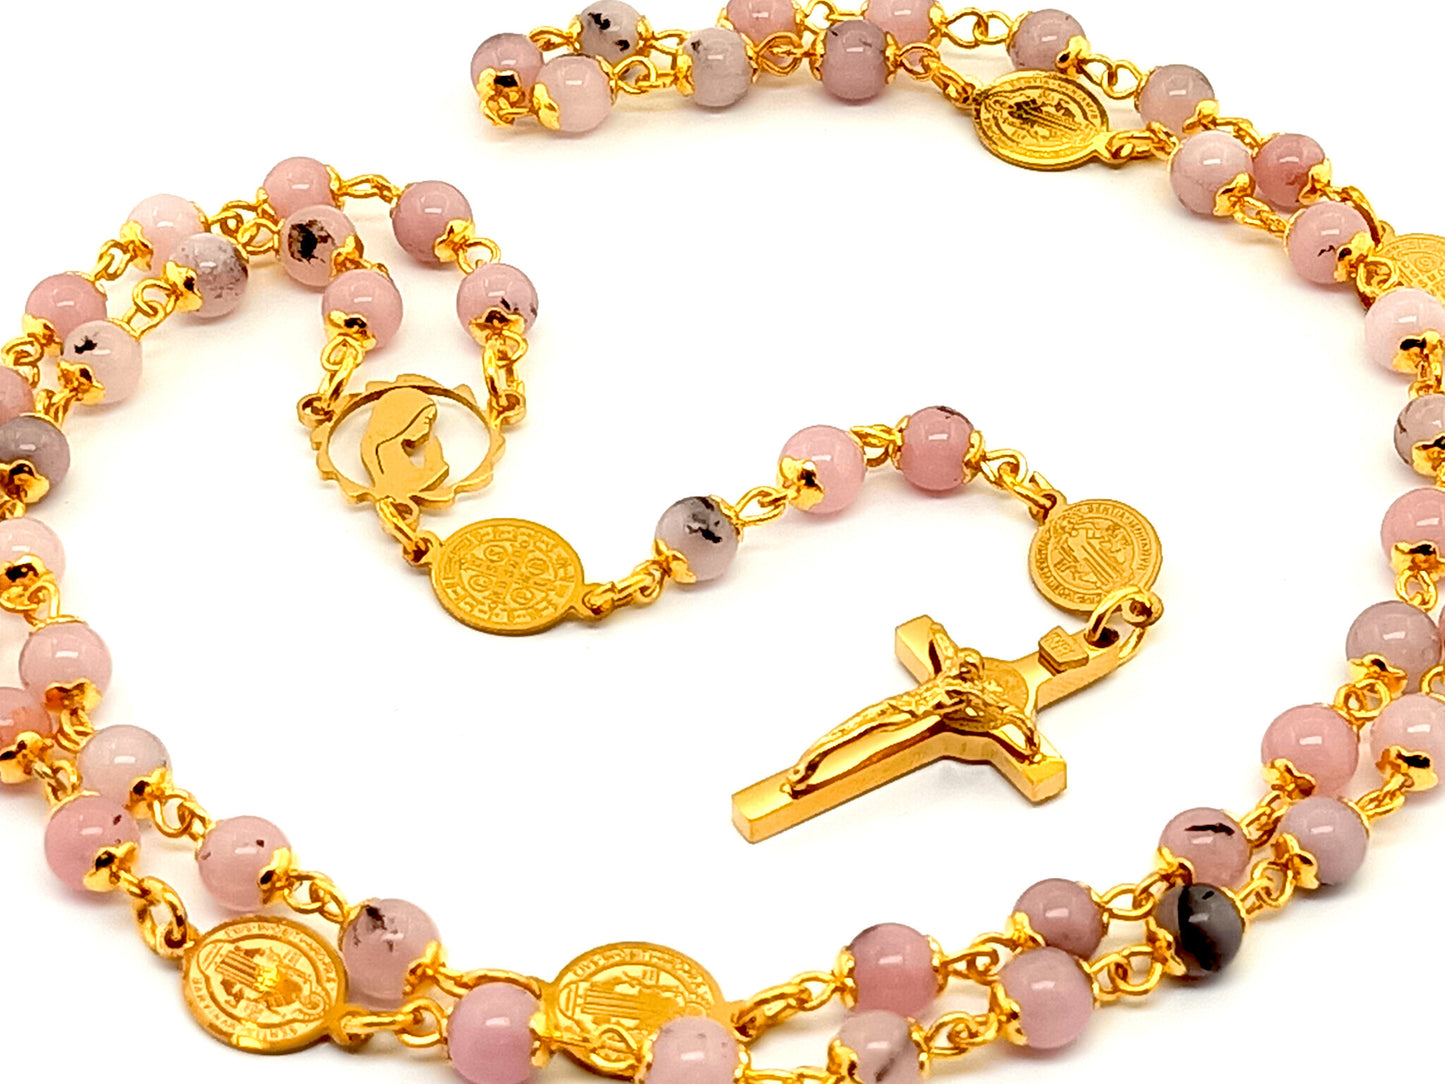 Miraculous medal unique rosary beads with agate gemstone beads and etched Saint Benedict medals and crucifix and Virgin Mary gold plated stainless medal.